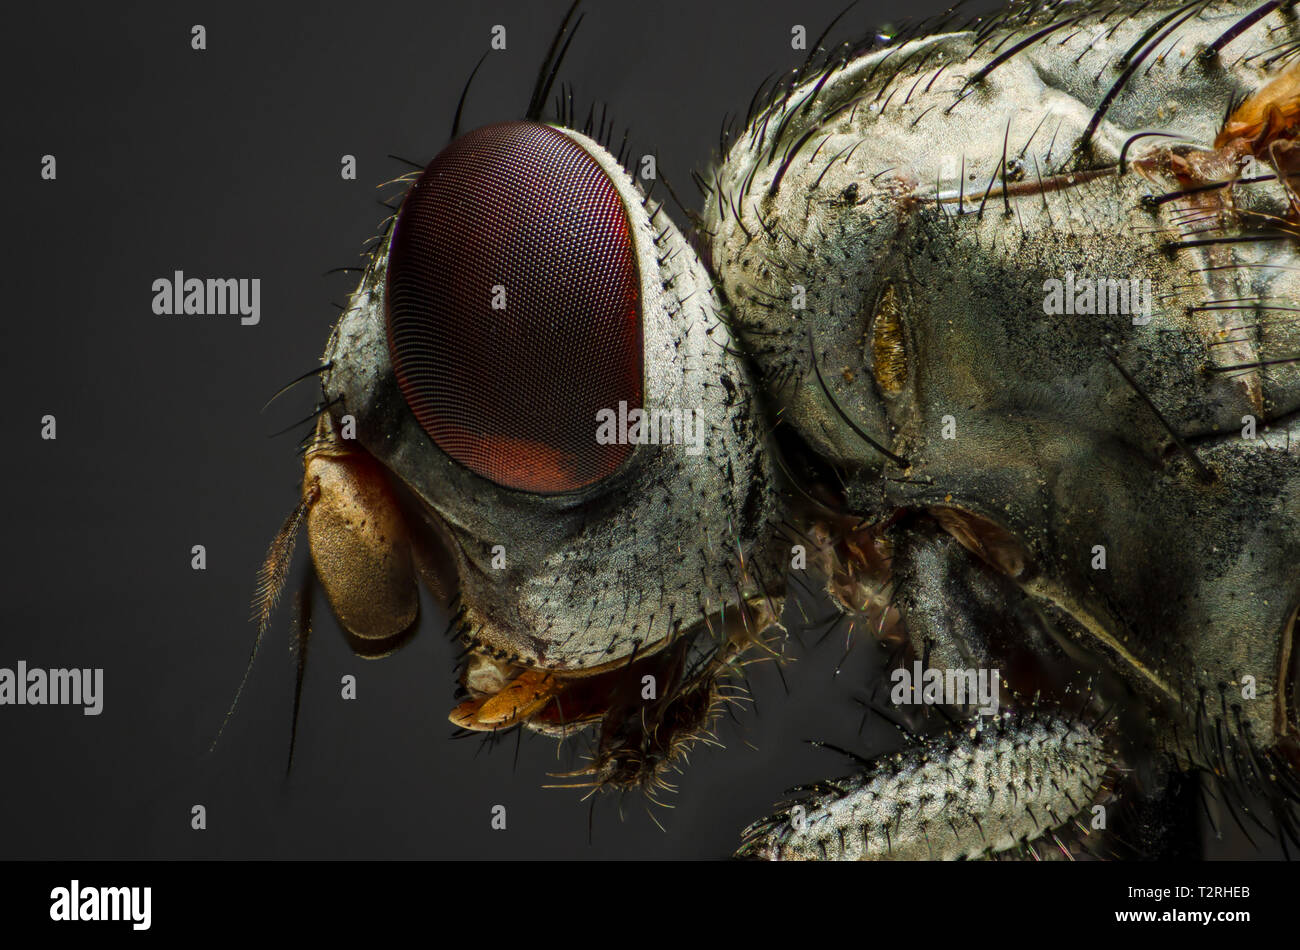 A high magnification, x4, image of a common house fly Stock Photo